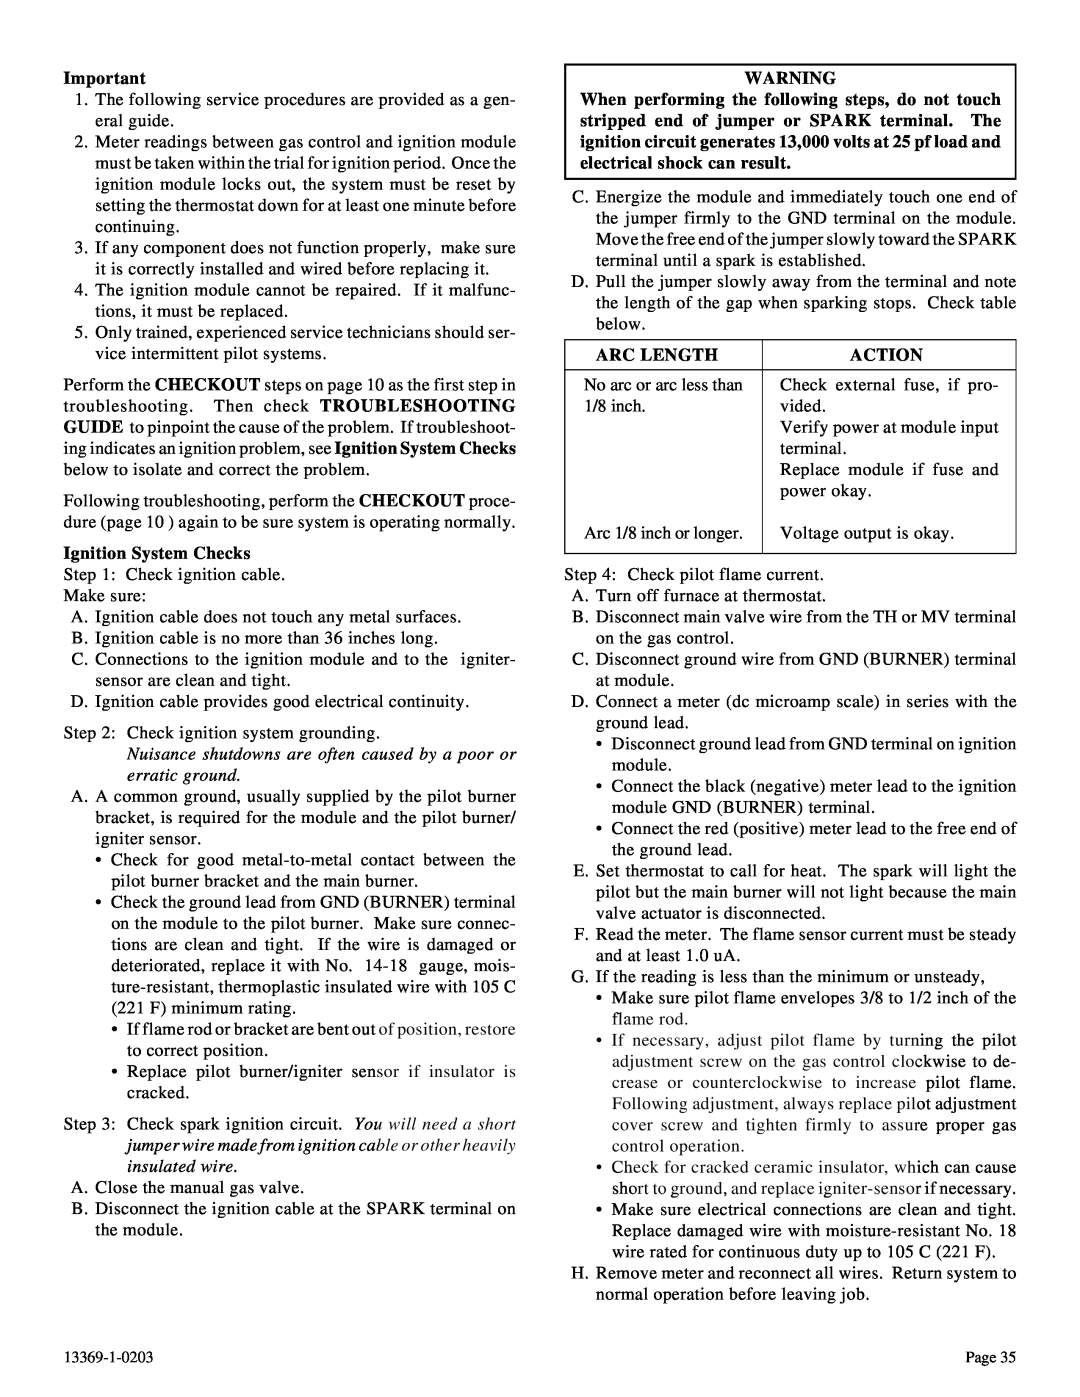 DVS 30-2 installation instructions Ignition System Checks, Arc Length, Action 